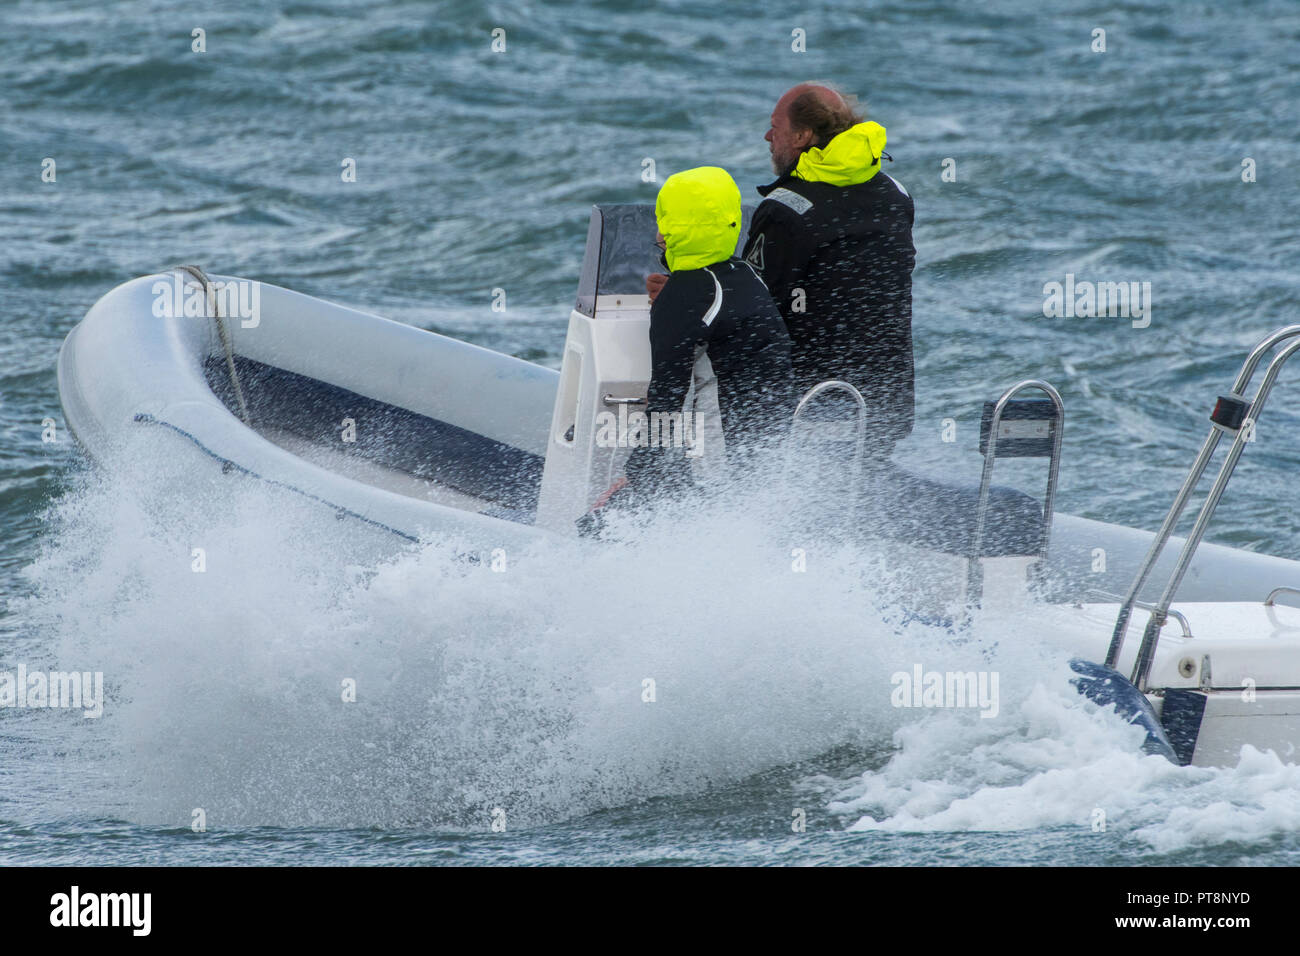 man and woman in rib rigid inflatable boat in rough seas or weather Stock Photo